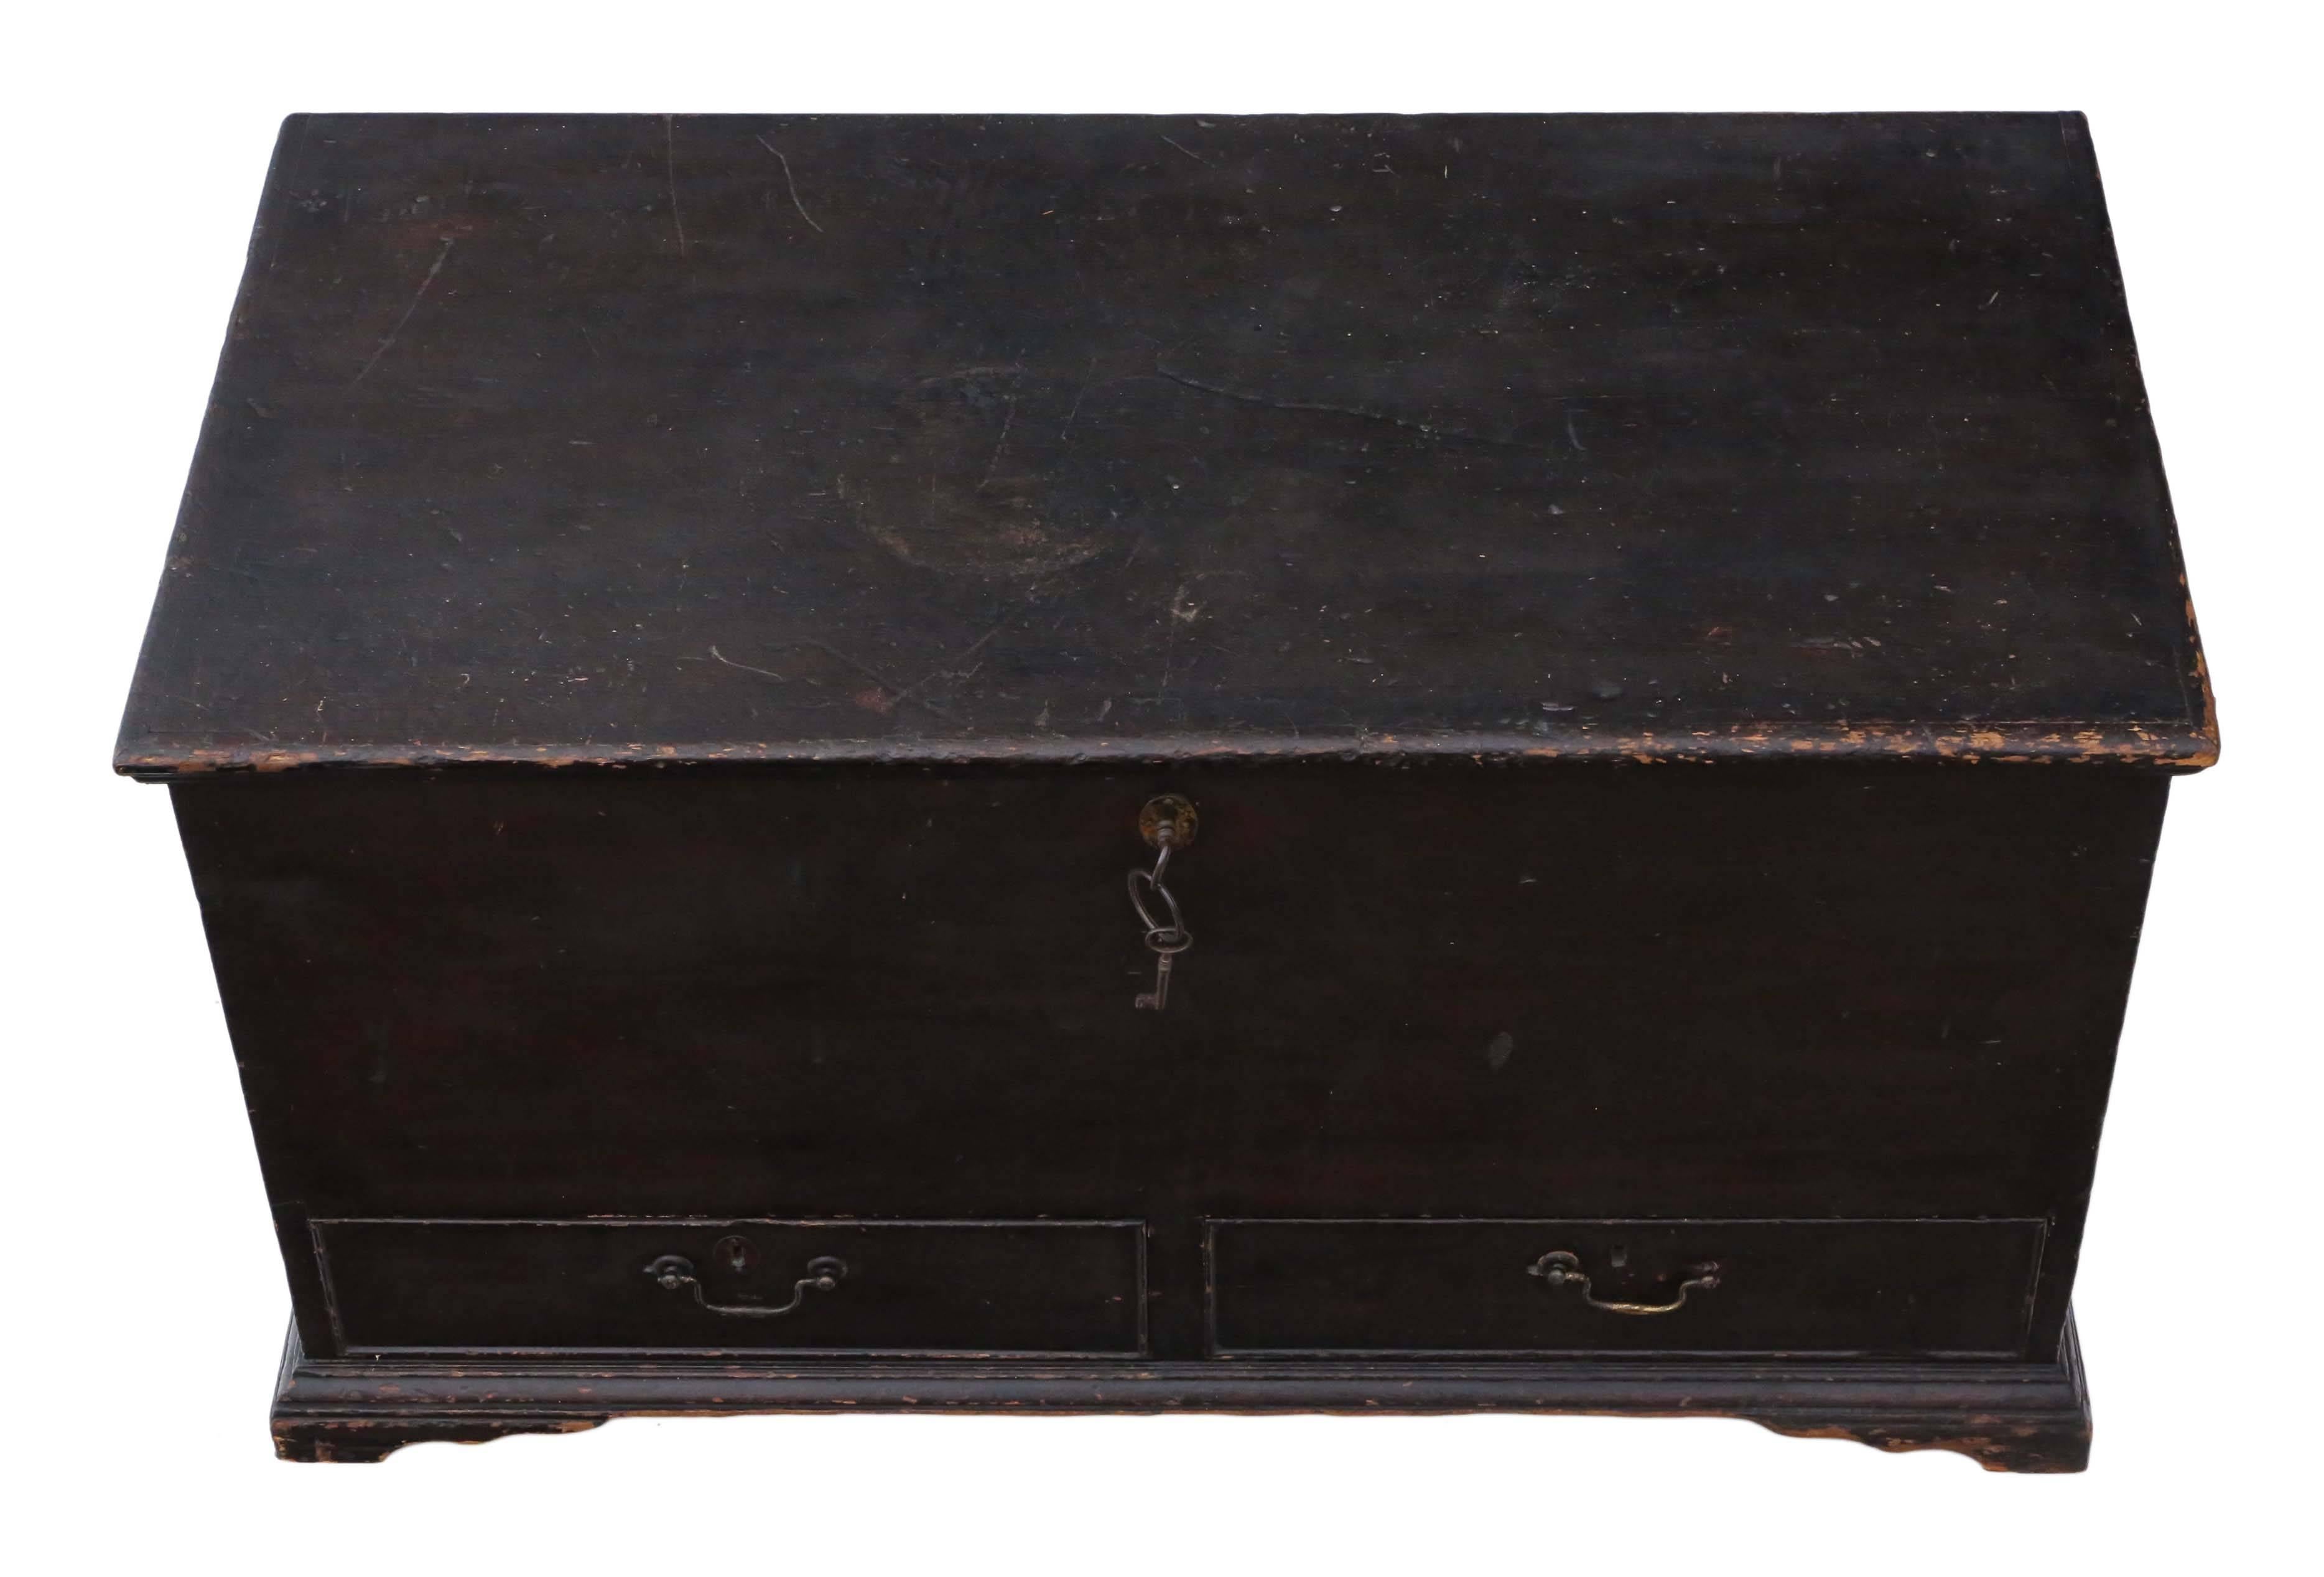 Antique circa 1800 Georgian coffer or mule chest. A quality piece made from pine with original scumble finish. Would make a great coffee table, ottoman or log box. We have period keys. A very rare find with a clean interior and no woodworm.

Solid